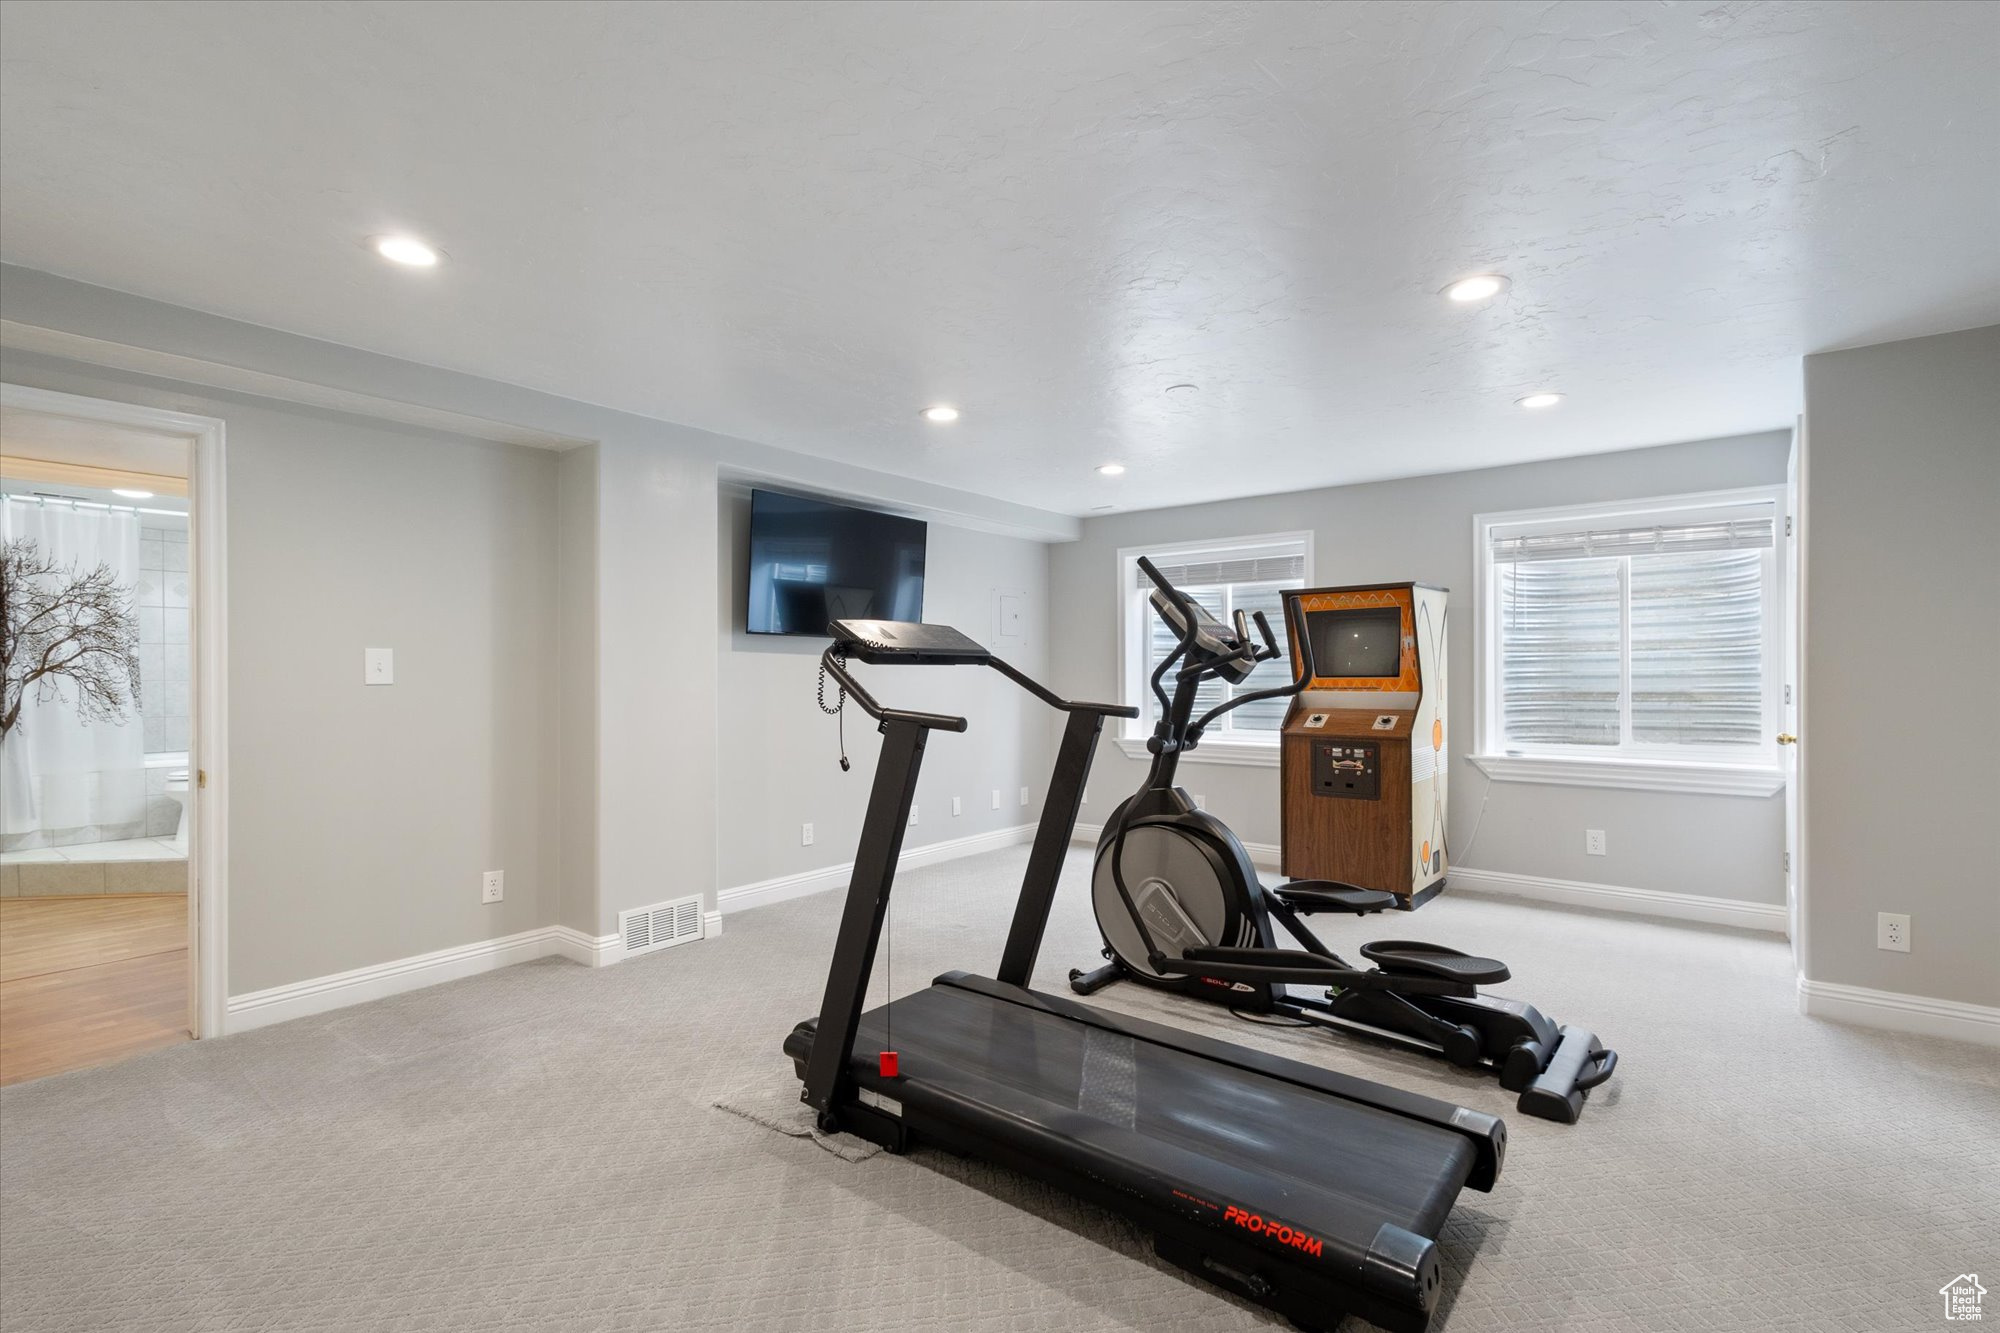 Exercise room/bedroom